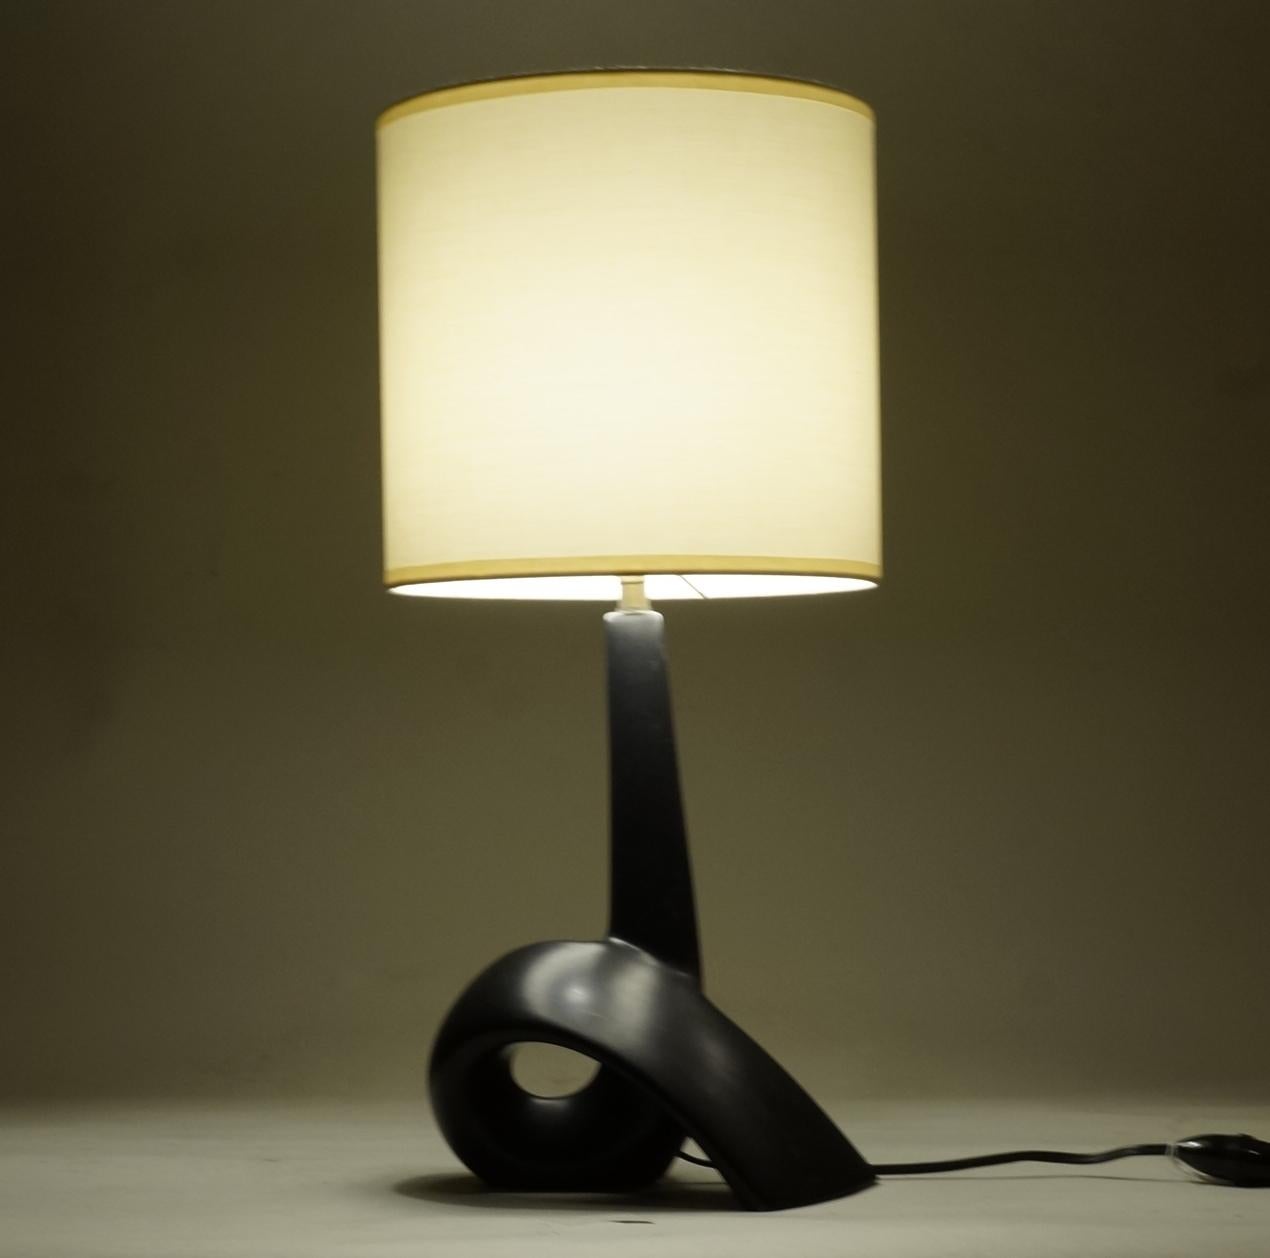 Black satin ceramic table lamp.
Custom-made fabric lampshade.
Rewired with twisted silk cord.

Ceramic body height: 26 cm-10.3 in.
Height with lampshade: 49 cm-19.3 in.